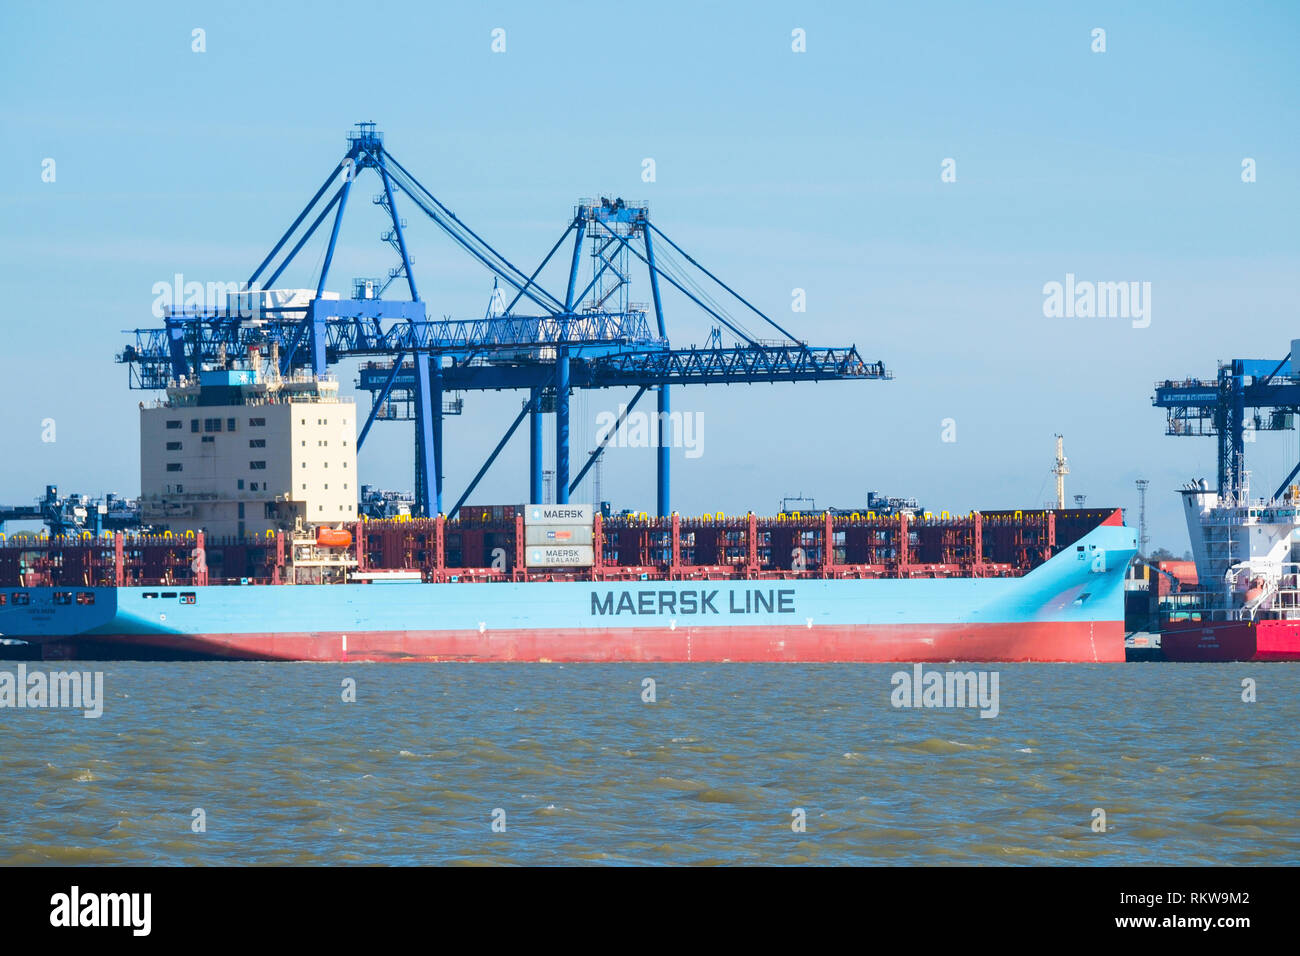 The Venta Maersk container ship built in 2018 seen at Felixstowe. Stock Photo